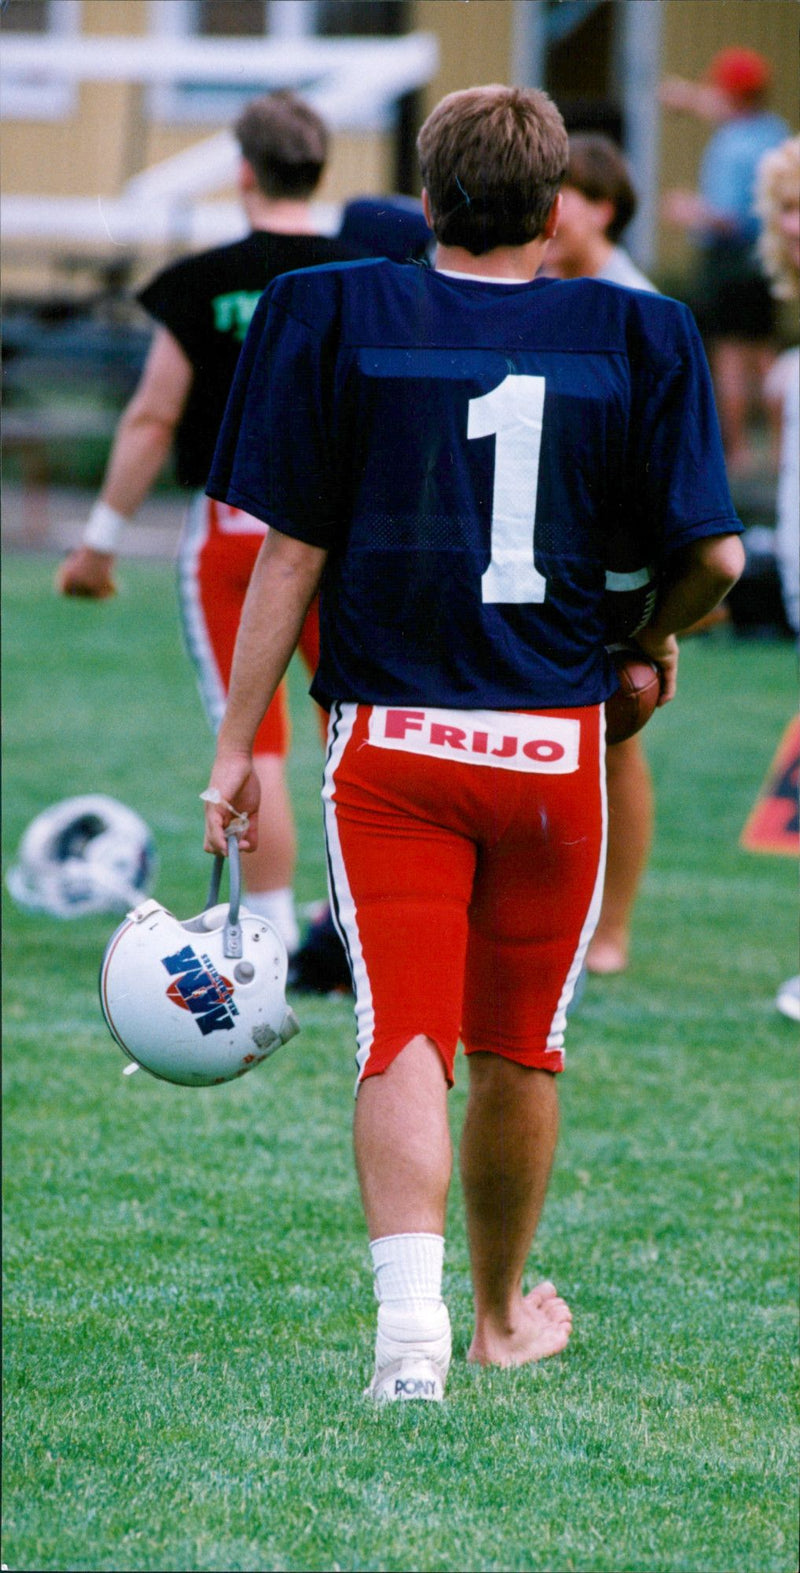 American Football - Lars Bönnelyches kicks without a shoe. - Vintage Photograph